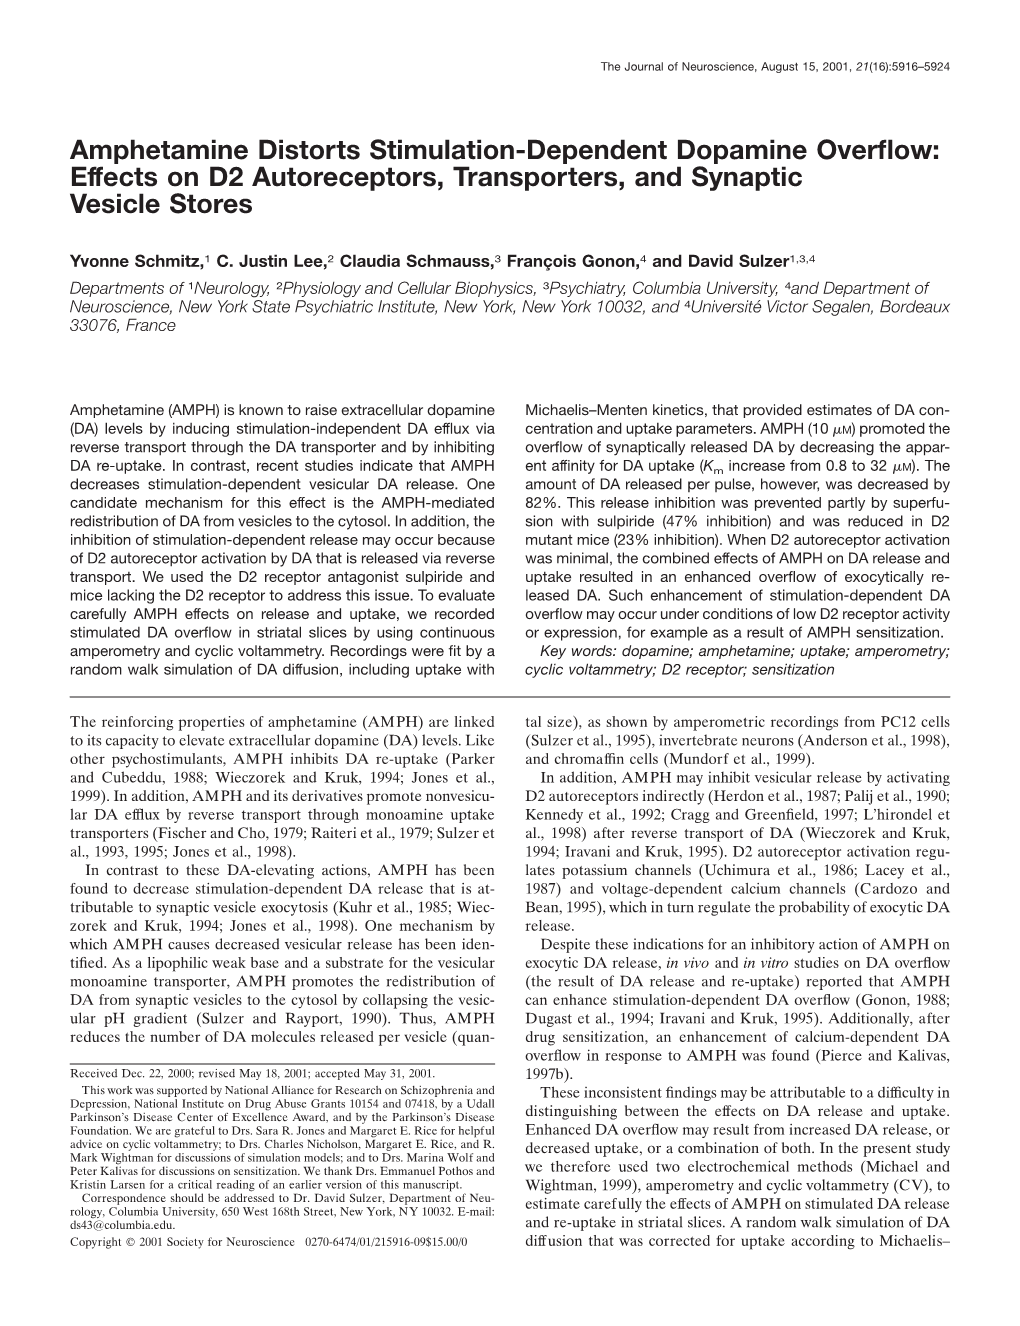 Effects on D2 Autoreceptors, Transporters, and Synaptic Vesicle Stores